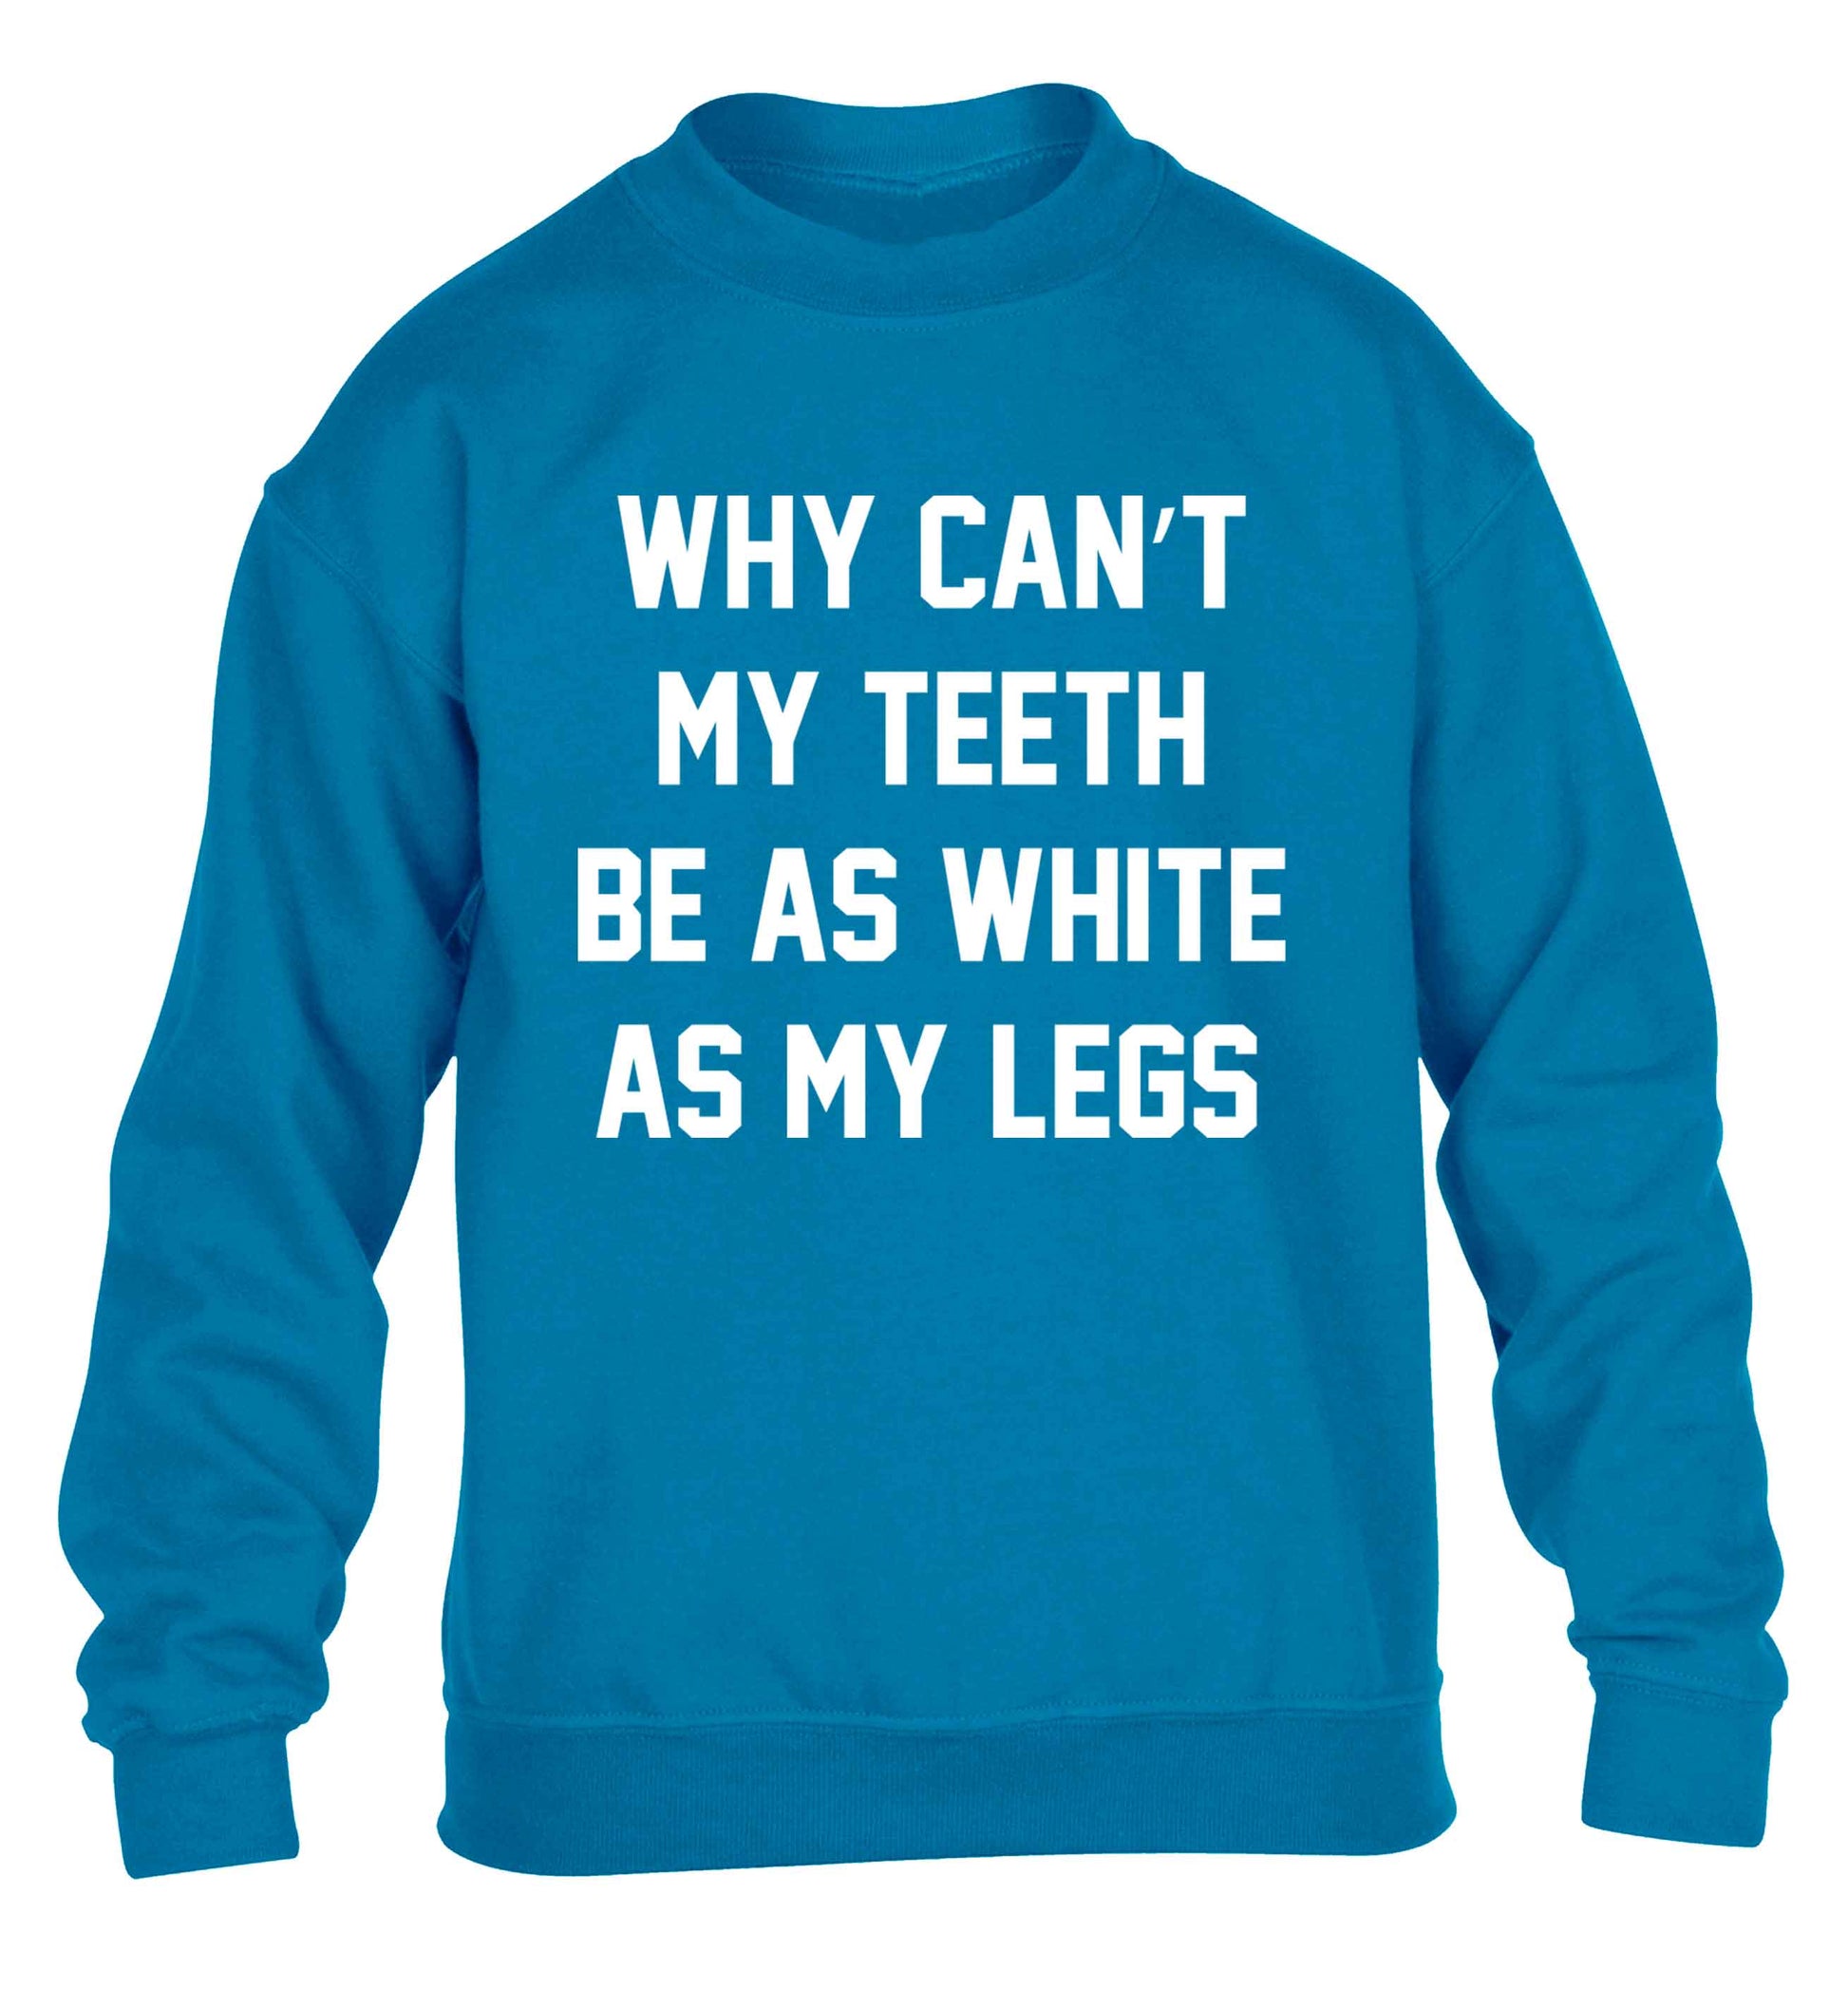 Why can't my teeth be as white as my legs children's blue sweater 12-13 Years